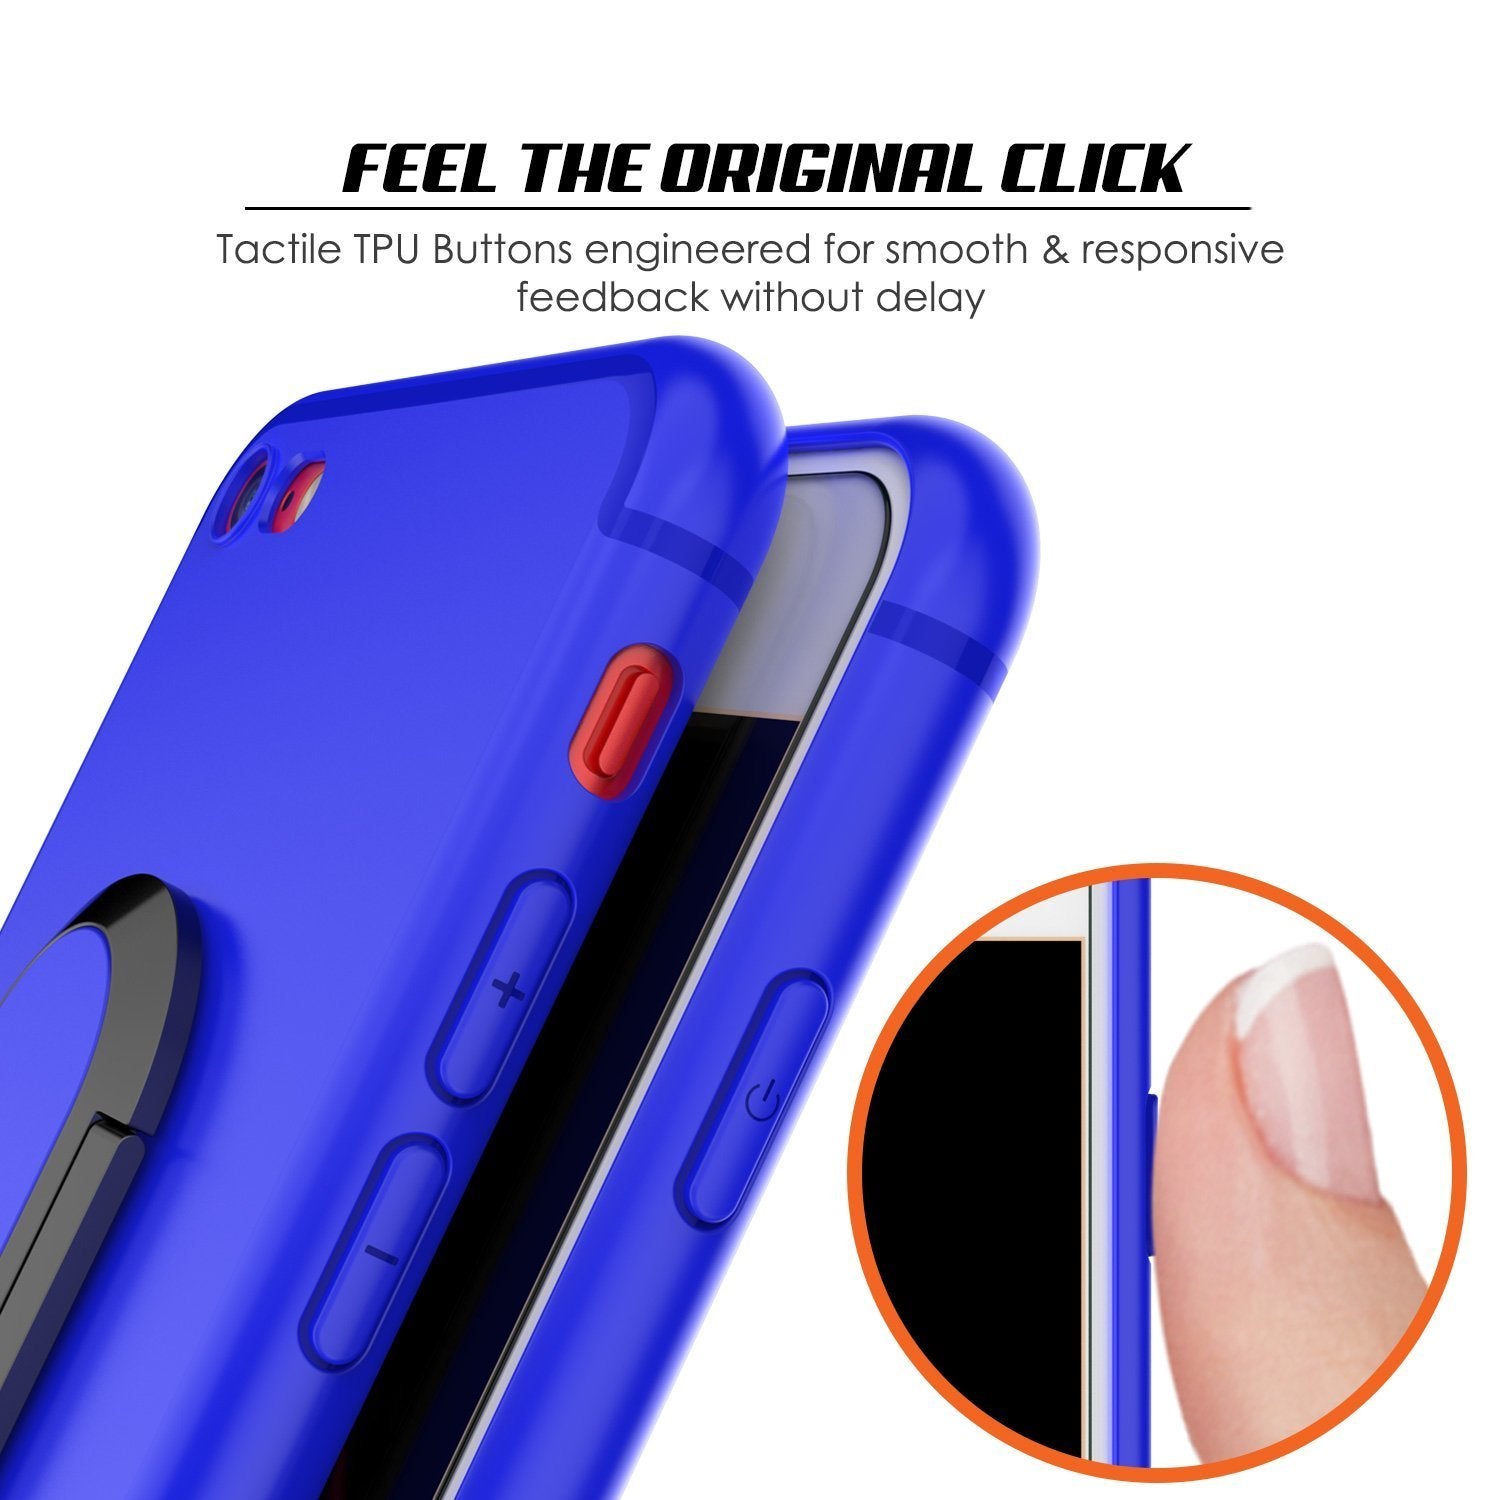 iPhone 8 Case, Punkcase Magnetix Protective TPU Cover W/ Kickstand, PLUS Tempered Glass Screen Protector [Blue]